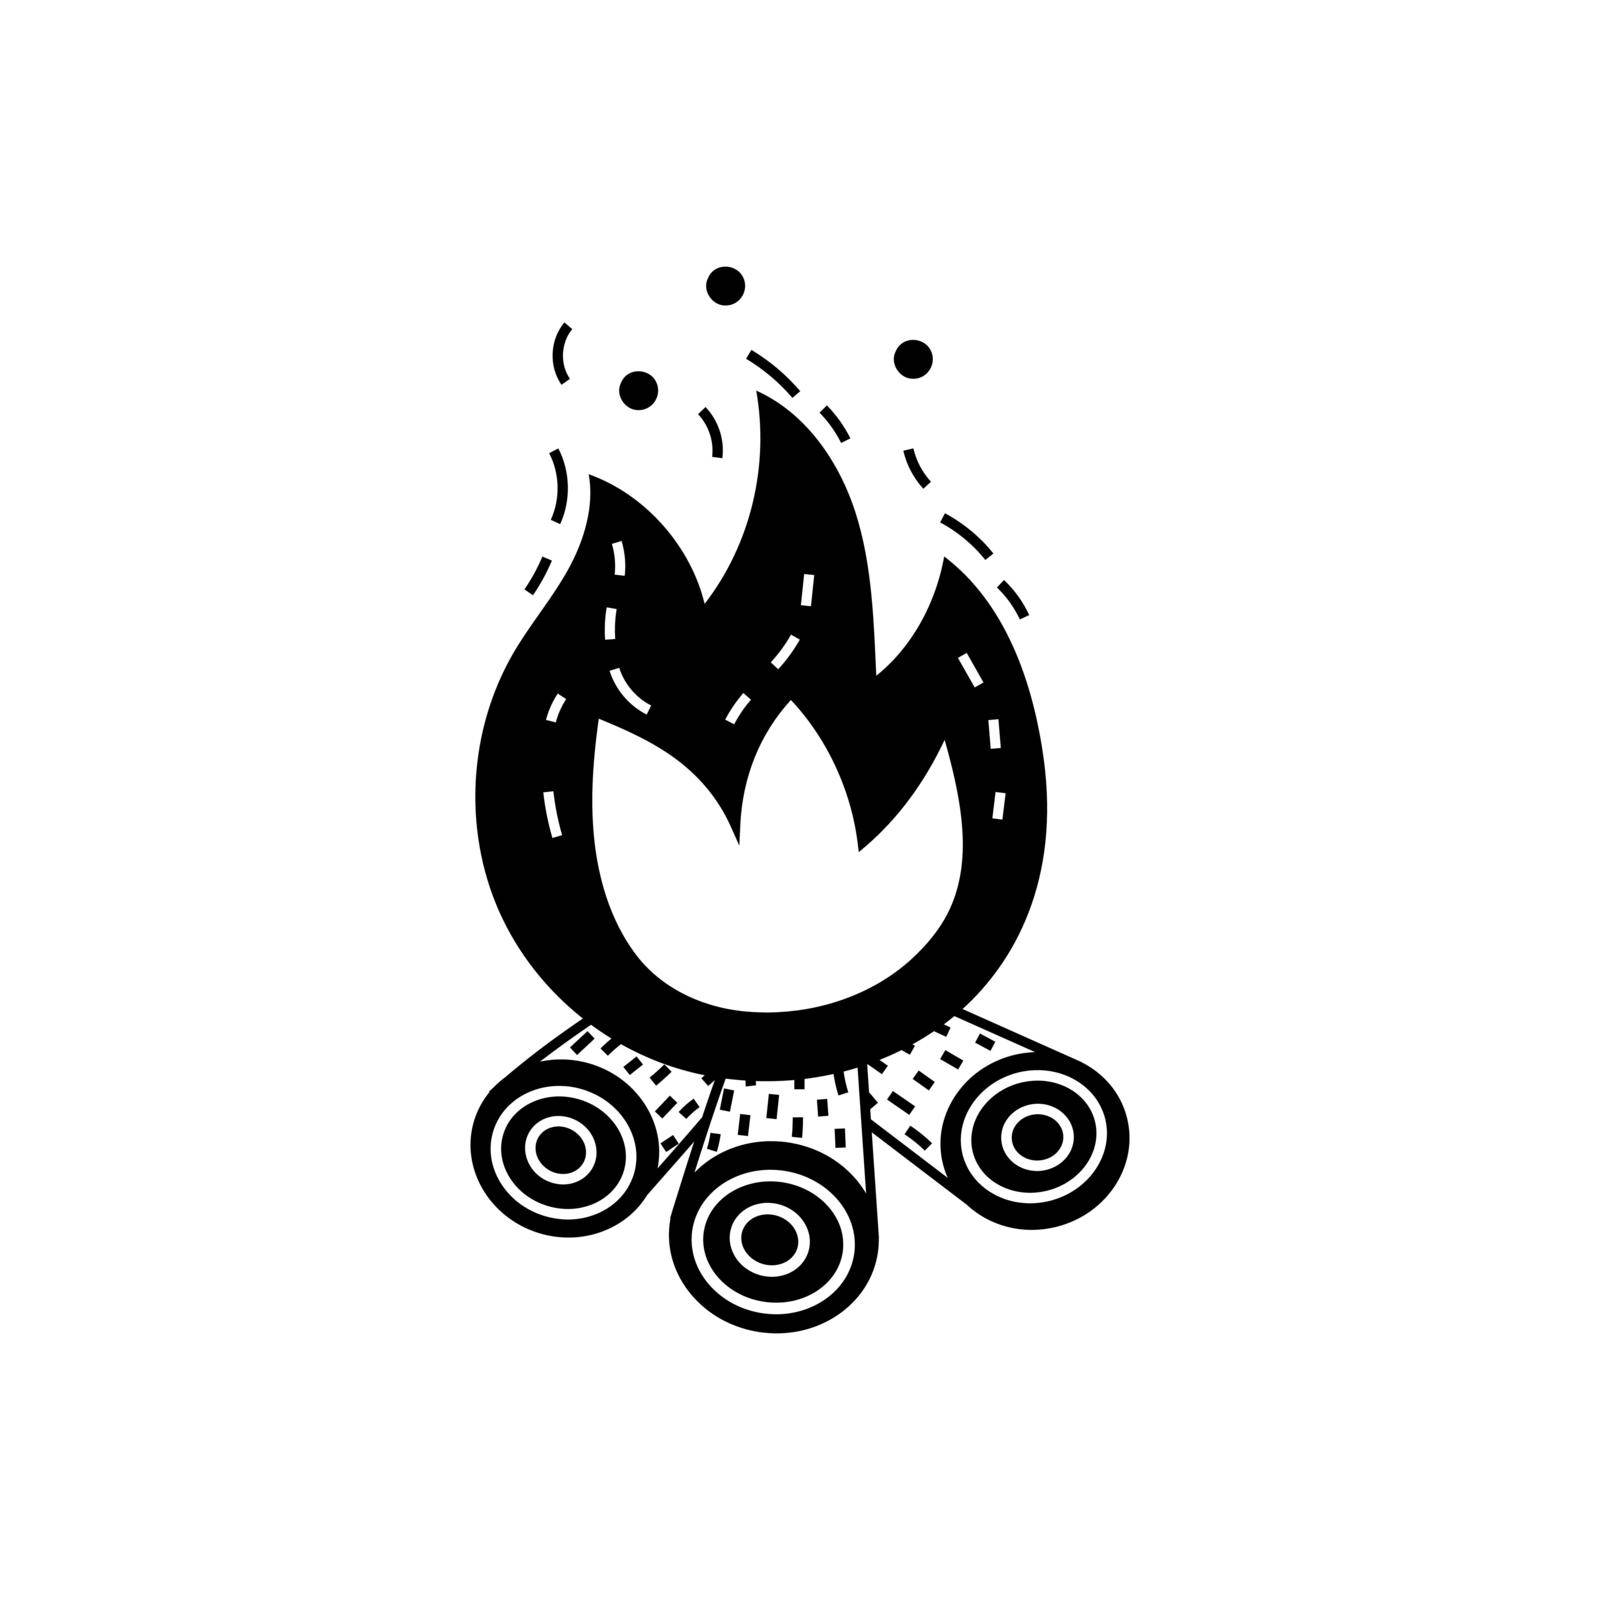 Camfire. Simple black and white doodle illustration, isolated.